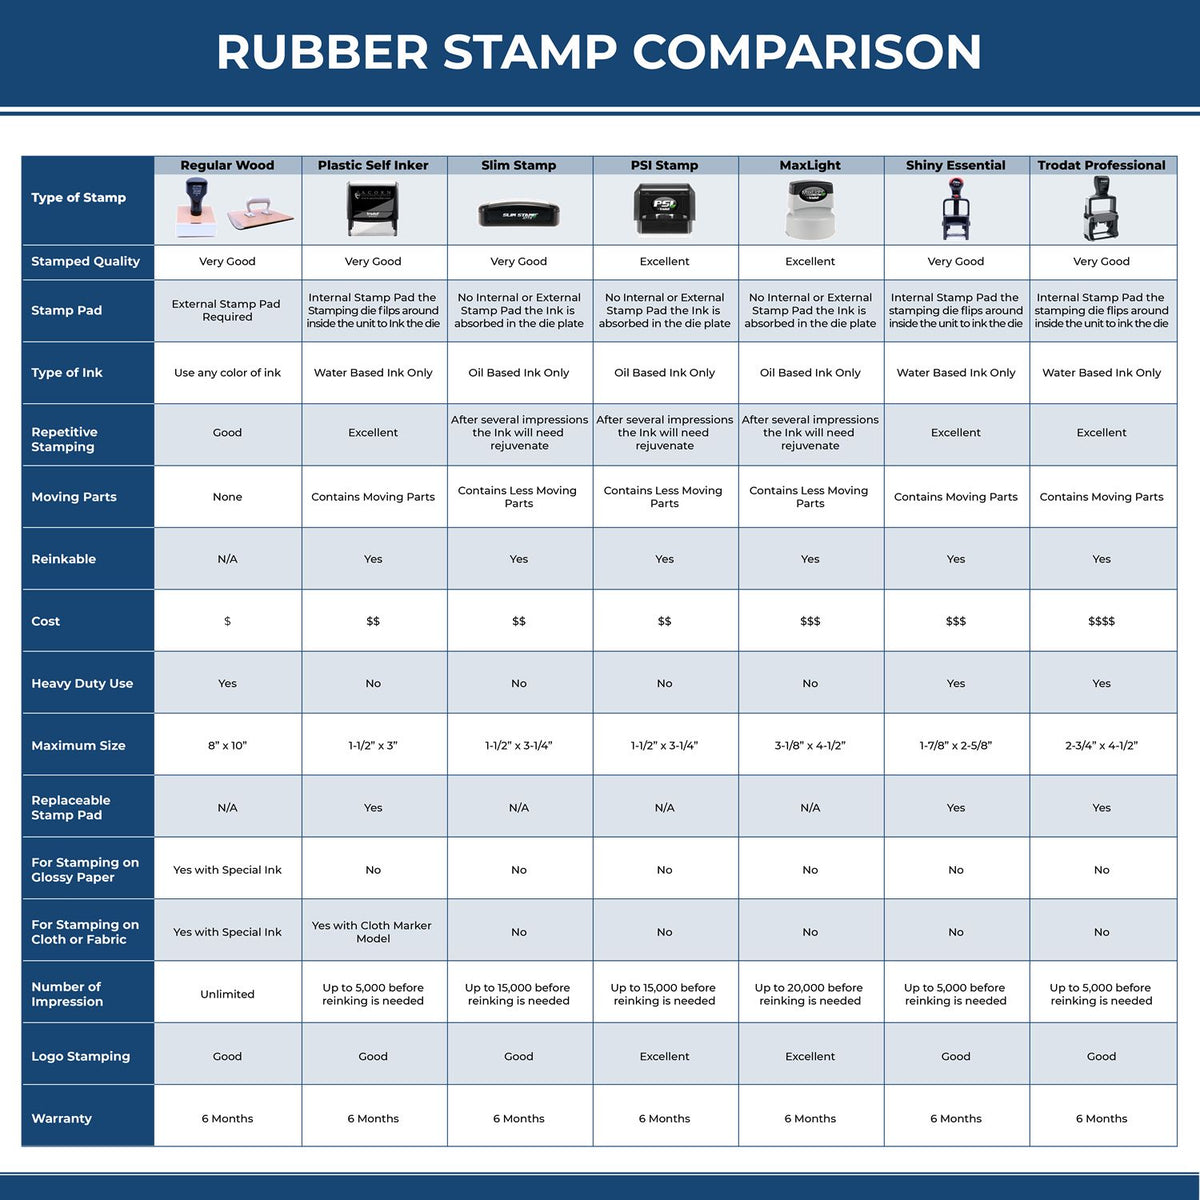 Large Self-Inking Nice Work Stamp 5599S Rubber Stamp Comparison